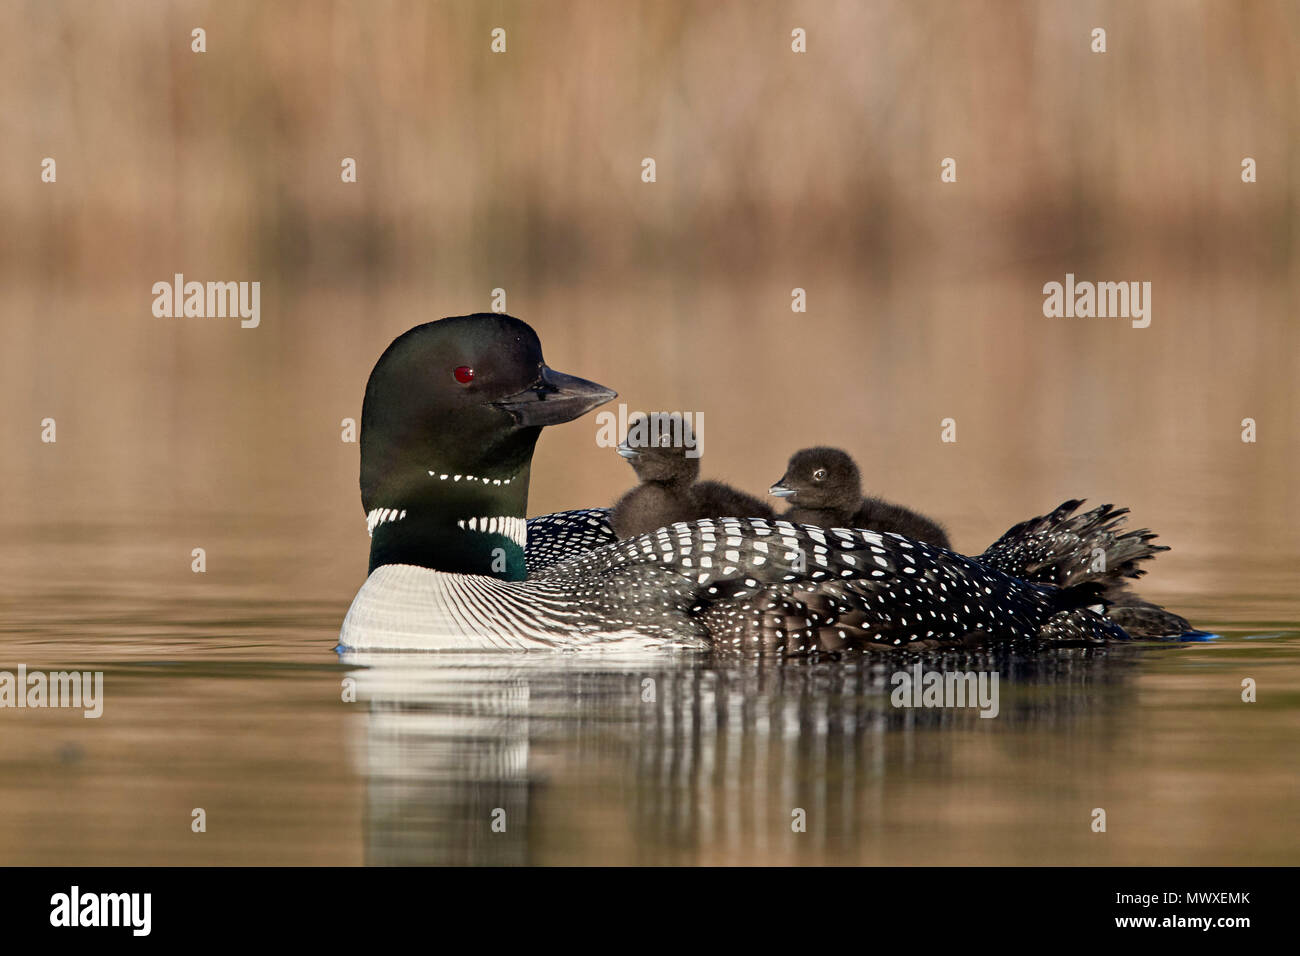 Common Loon (Gavia immer) adult and two chicks on its back, Lac Le Jeune Provincial Park, British Columbia, Canada, North America Stock Photo